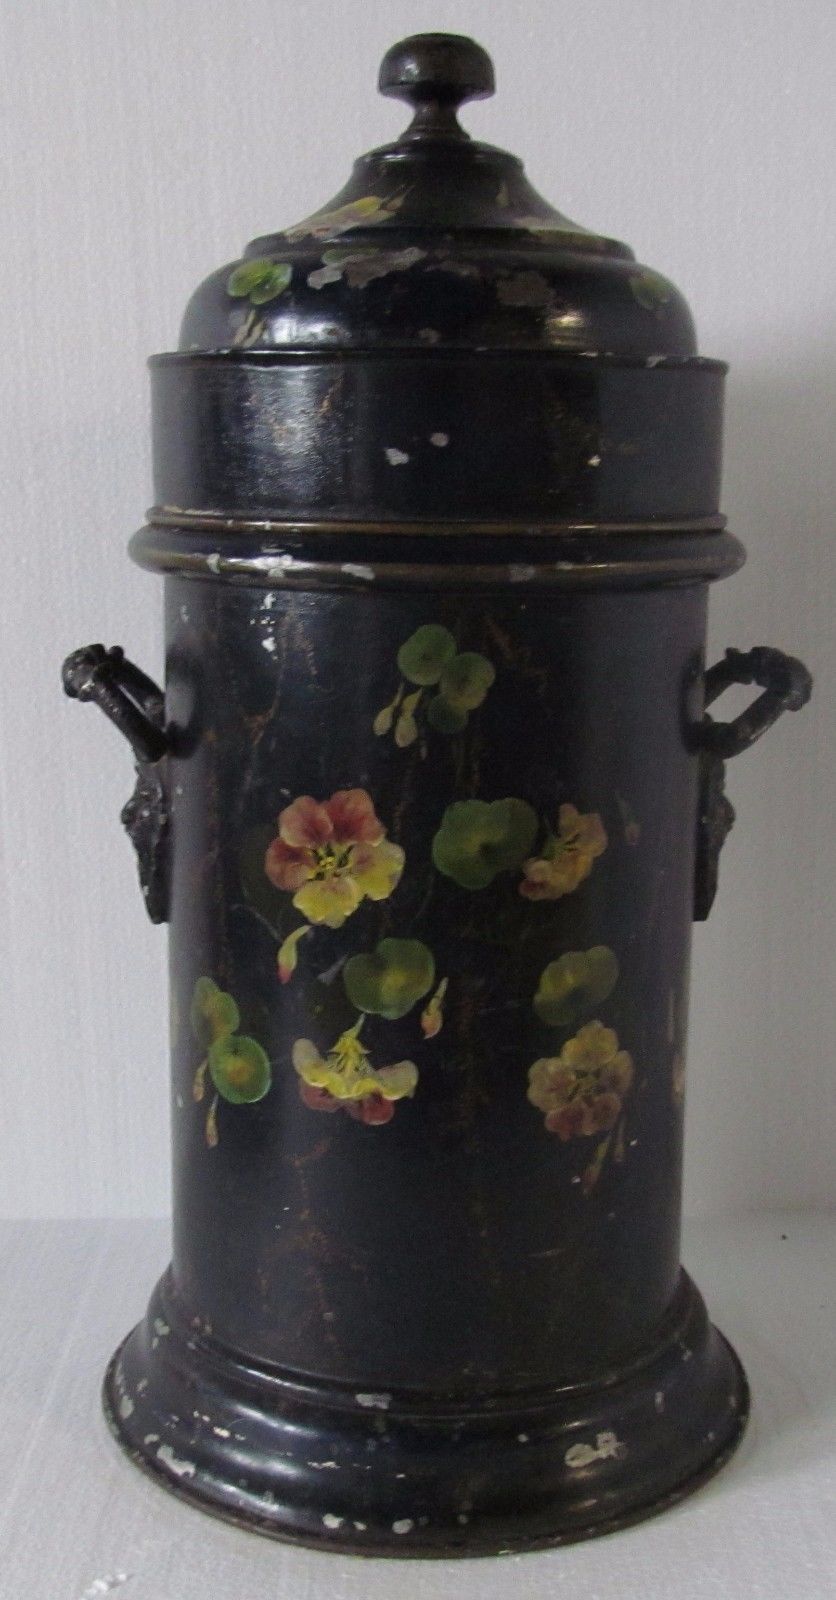 ANTIQUE 19TH CENTURY TOLE PAINTED BOTTLE COOLER WITH PORCELAIN LINED INTERIOR